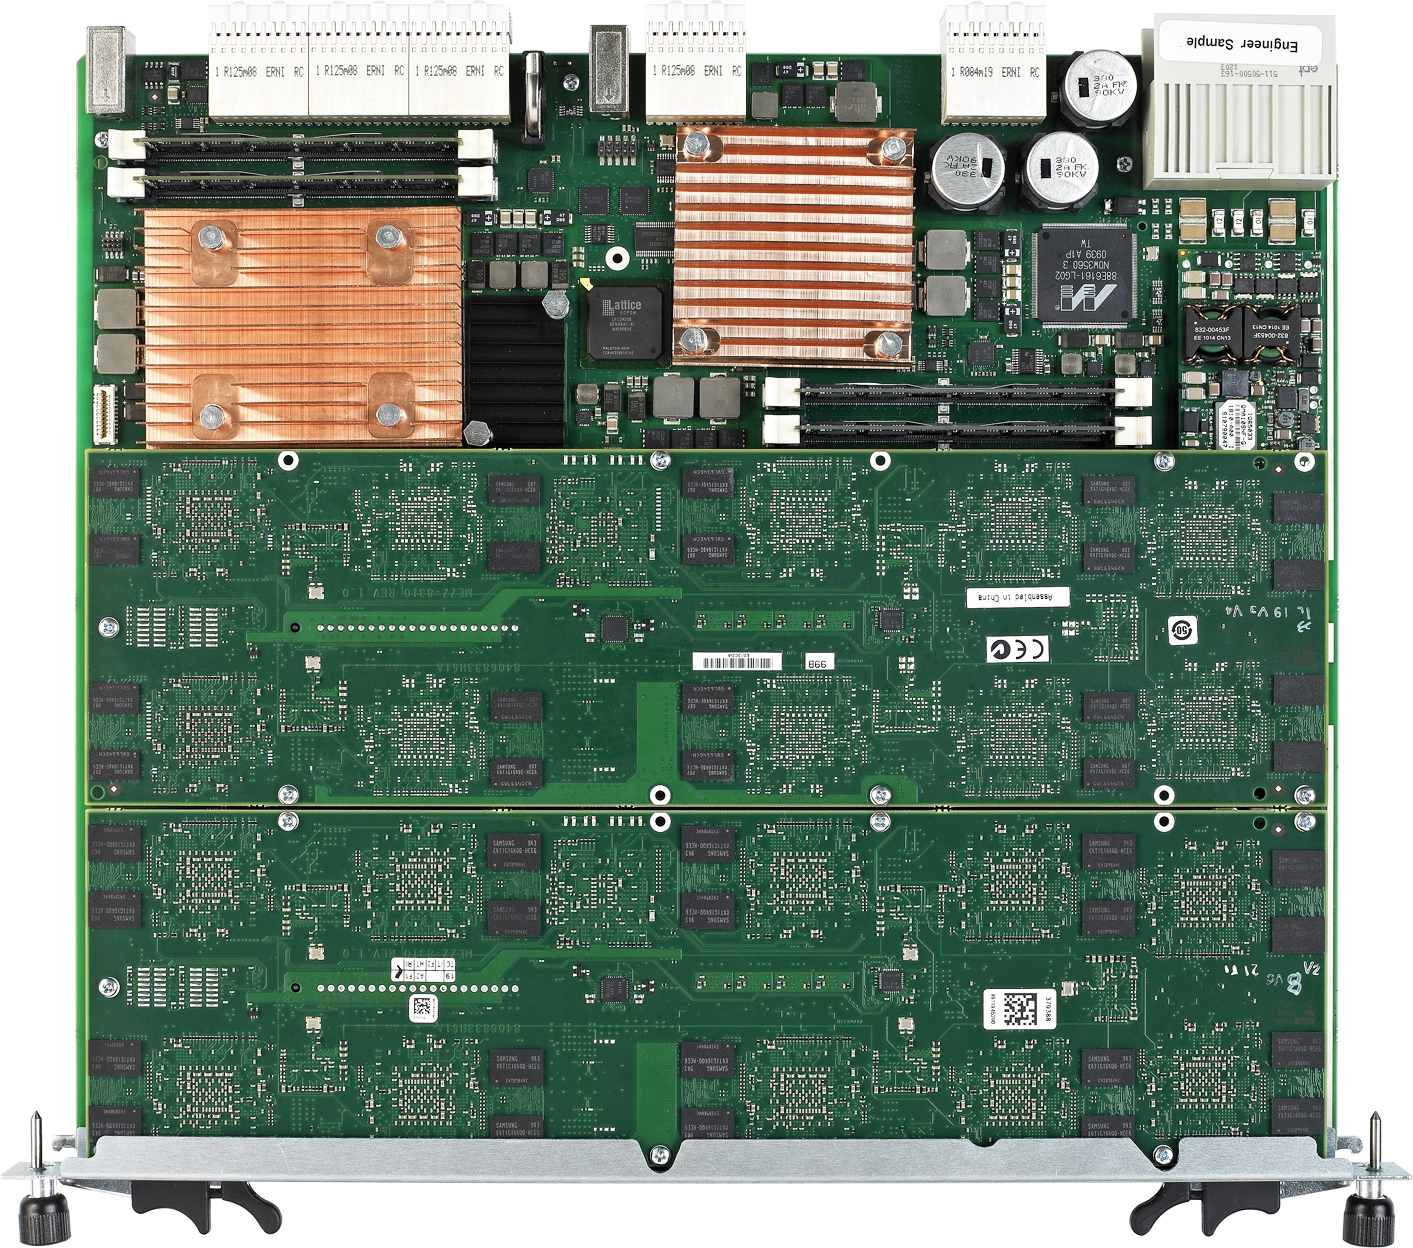 Emerson Network Power's ATCA Blade for Media Gateways Sets New Standards for Density, Performance and Flexibility